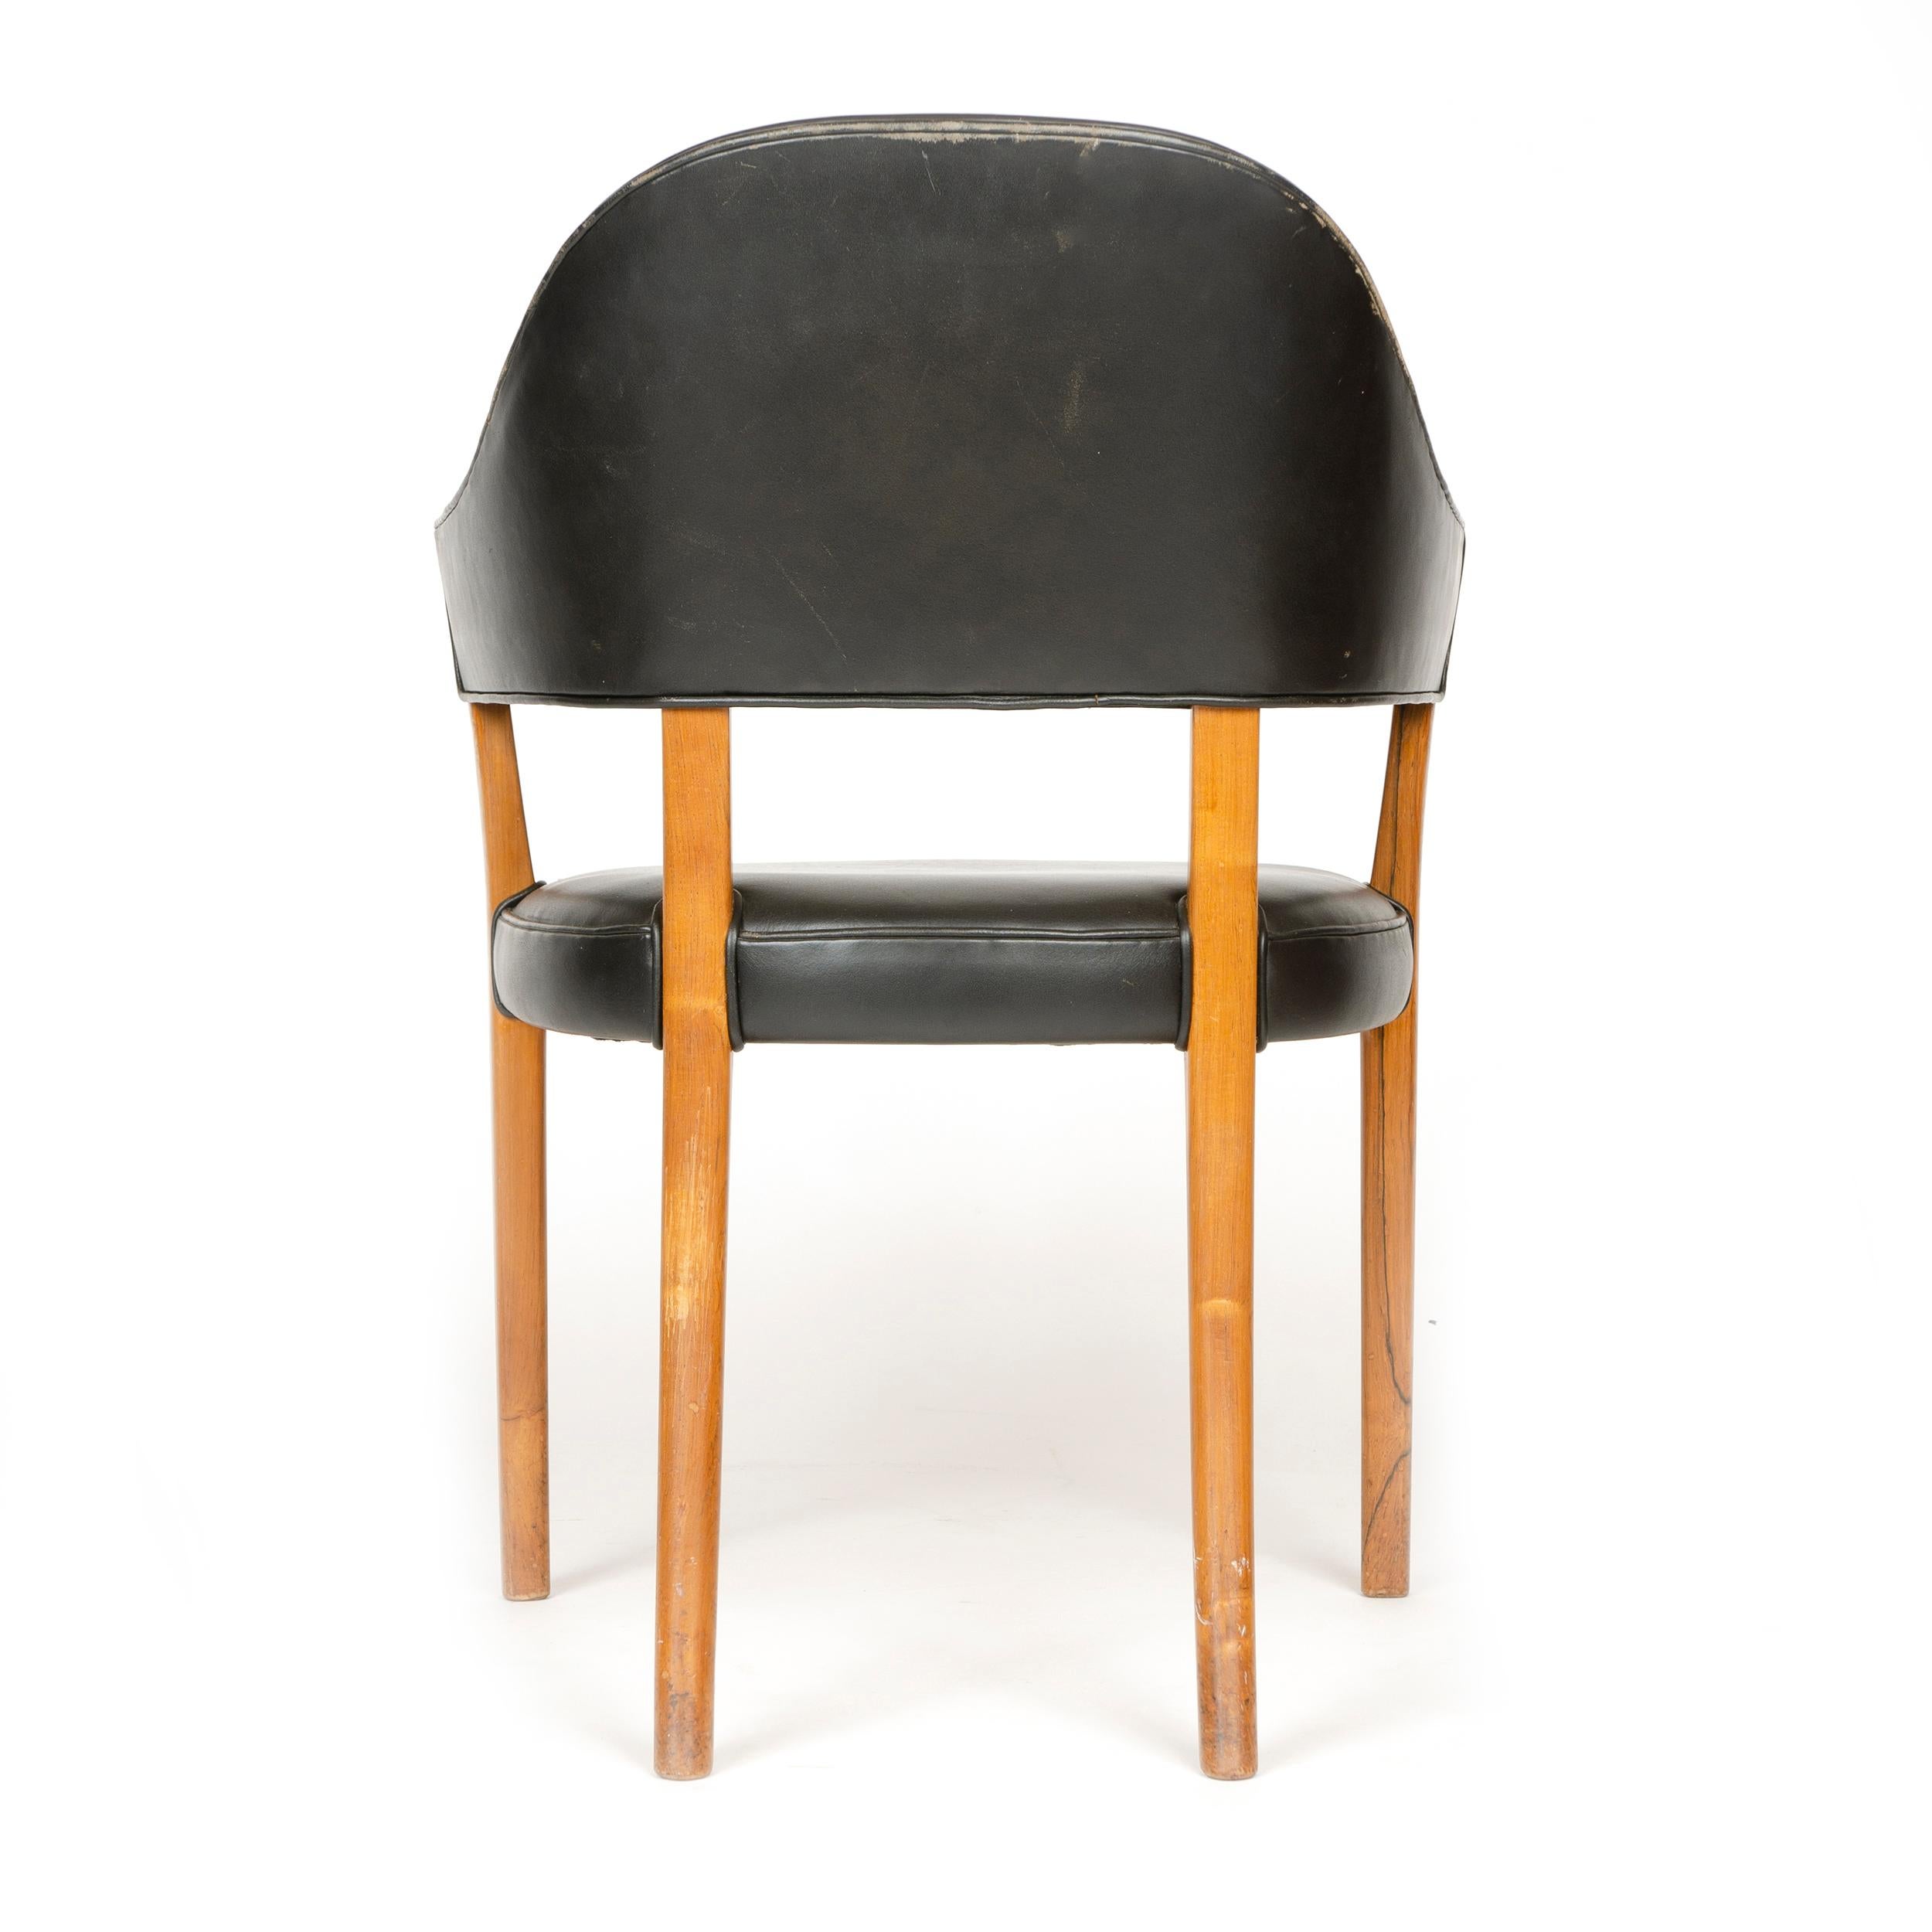 Mid-20th Century 1950s Danish Rosewood Humpback Armchair by Ole Wanscher for A. J. Iversen For Sale